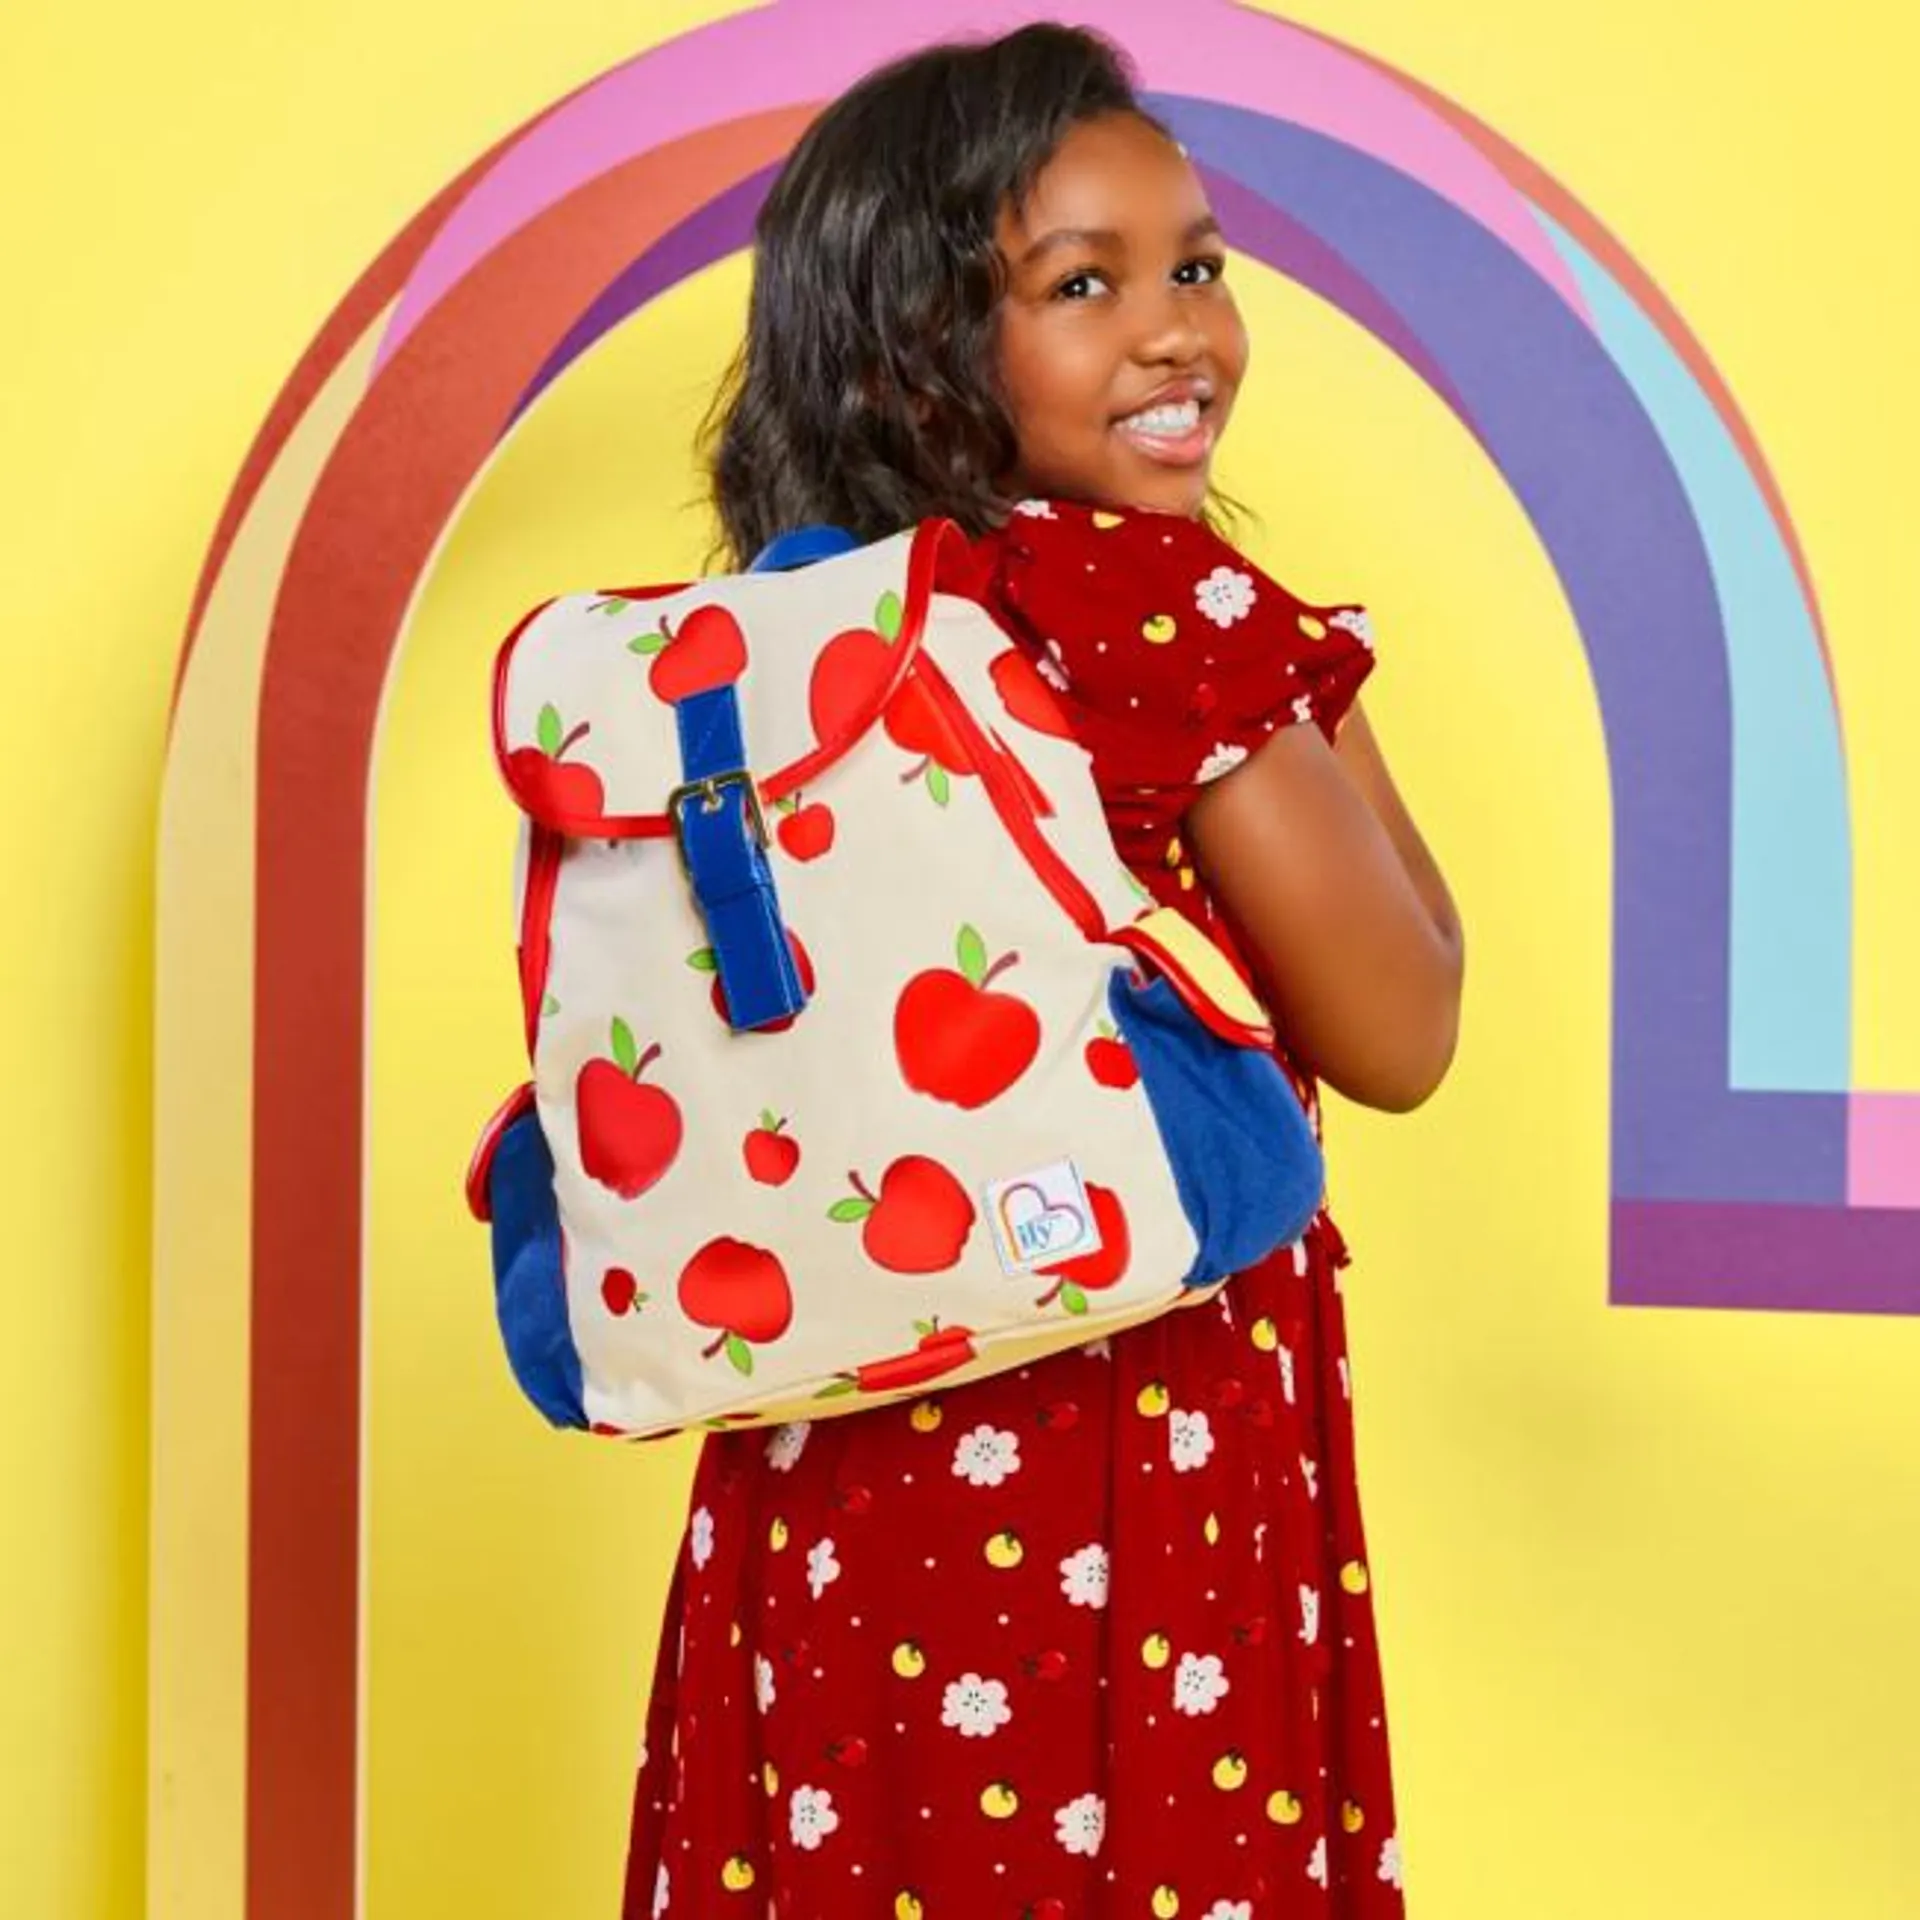 Disney Store Disney ily 4EVER Backpack Inspired by Snow White